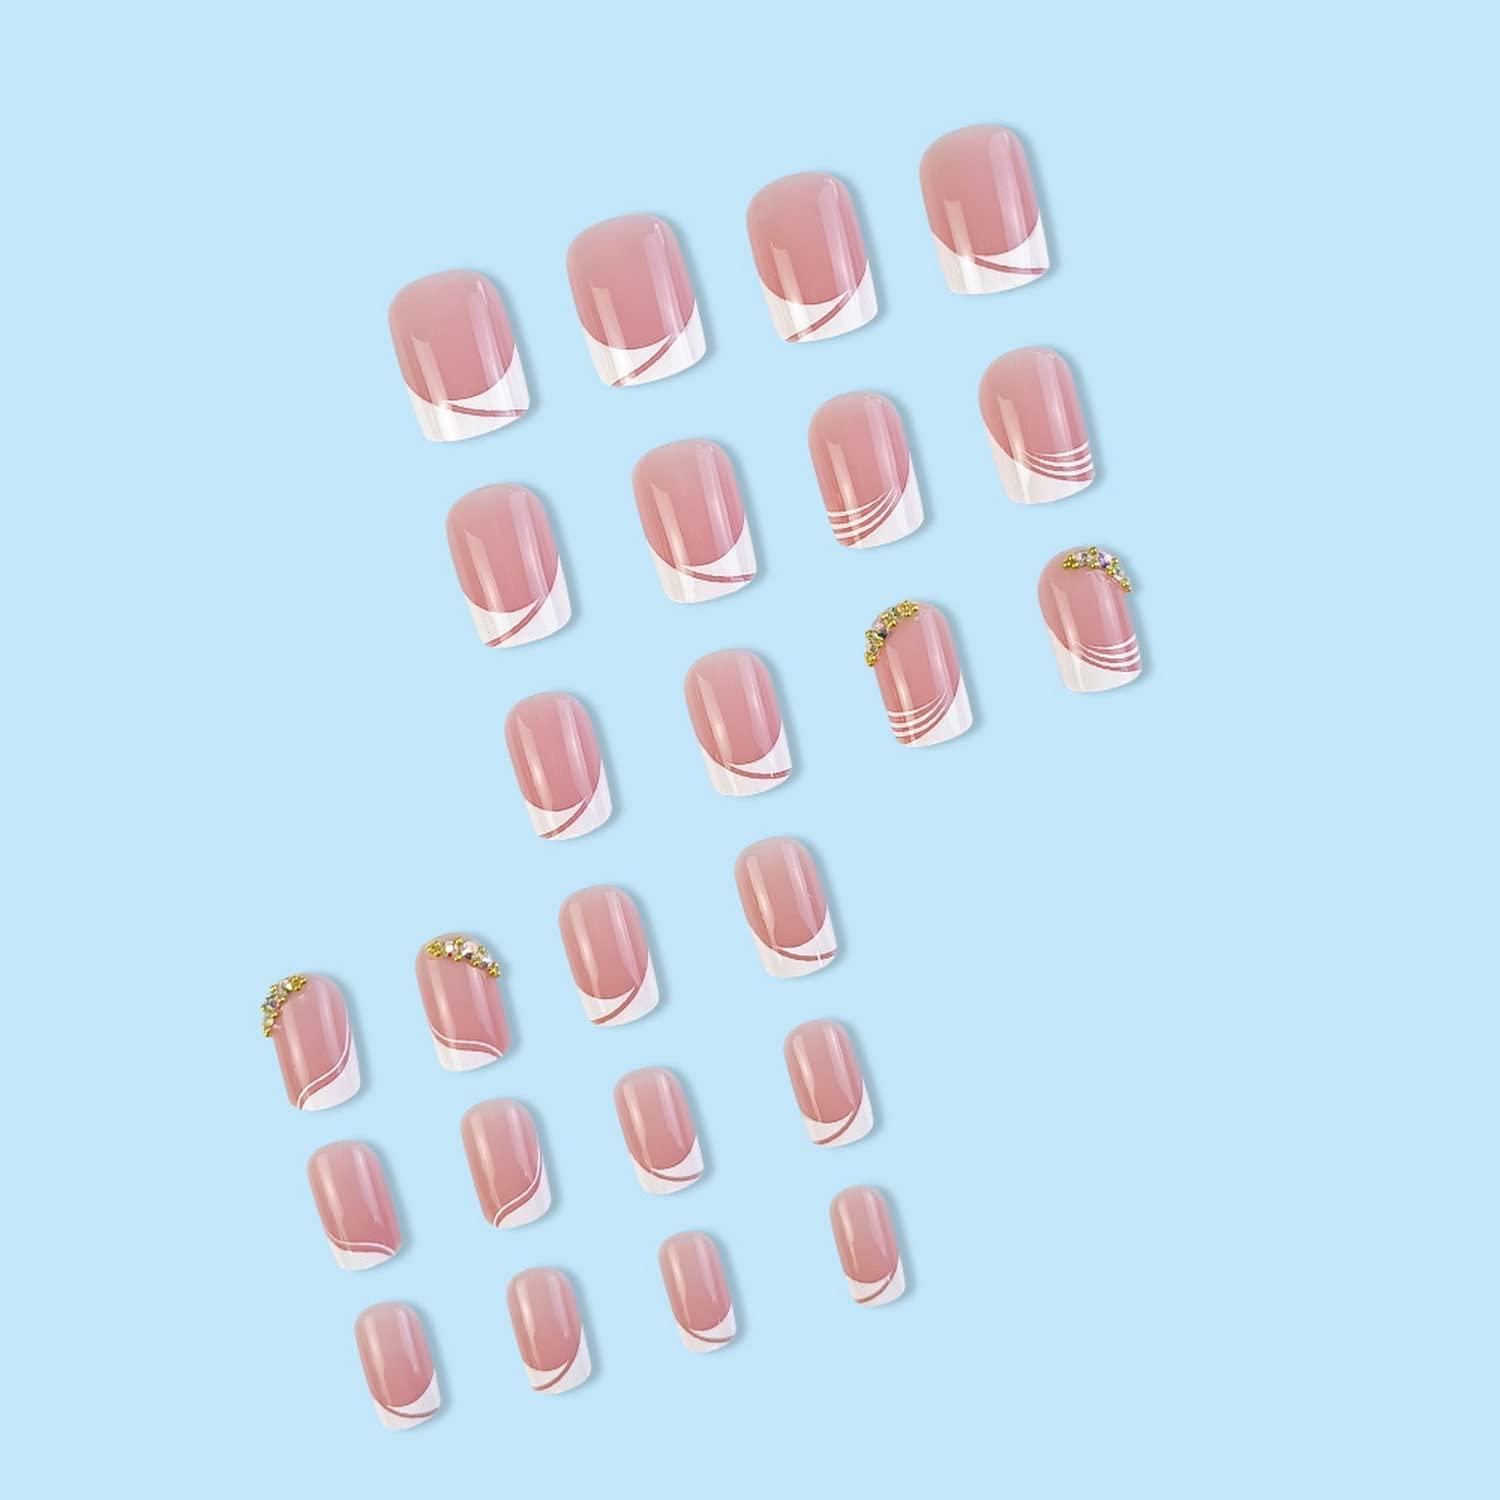 24 Pcs French Tip Press on Nails Short Square Fake Nails Nude Pink Glue on  Nails with Rhinestones Designs Medium French Acrylic Nails White Nail Tip  Artificial Nails for Women Nail Art